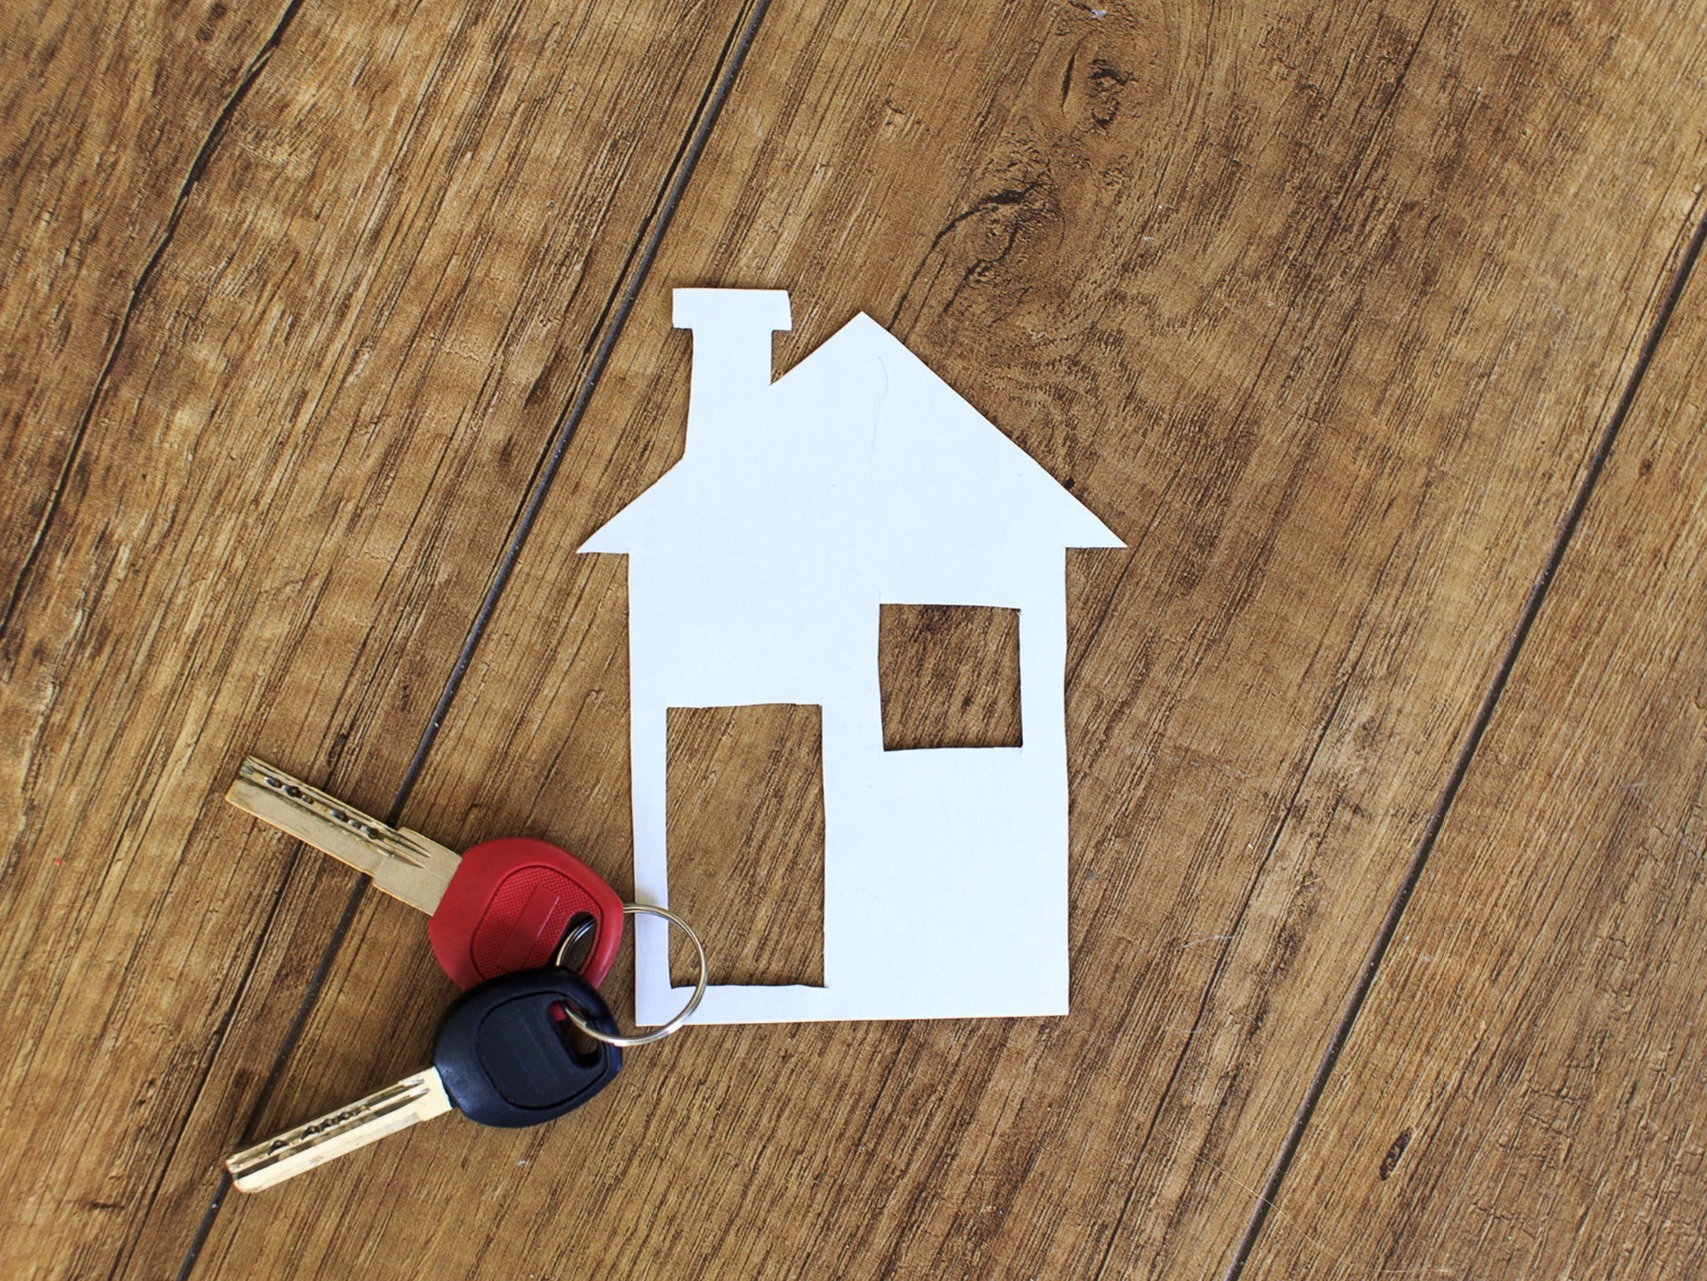 A paper house, with a set of keys on top; our Wills Solicitors in Lytham discuss whether you need a Will if you own property.